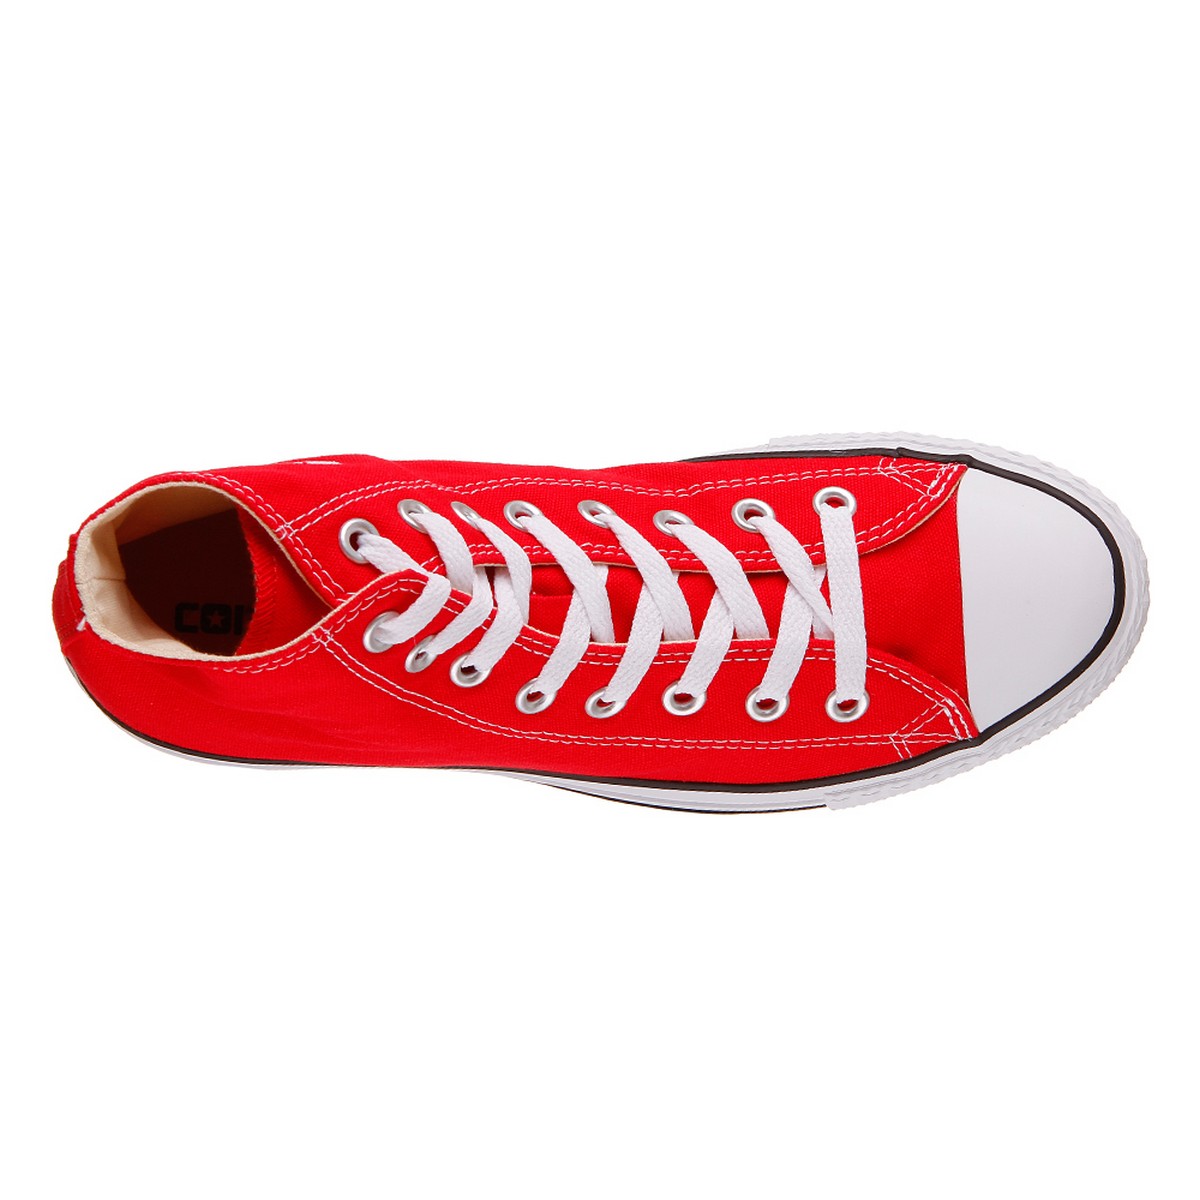 ALL STAR - RED - HI 